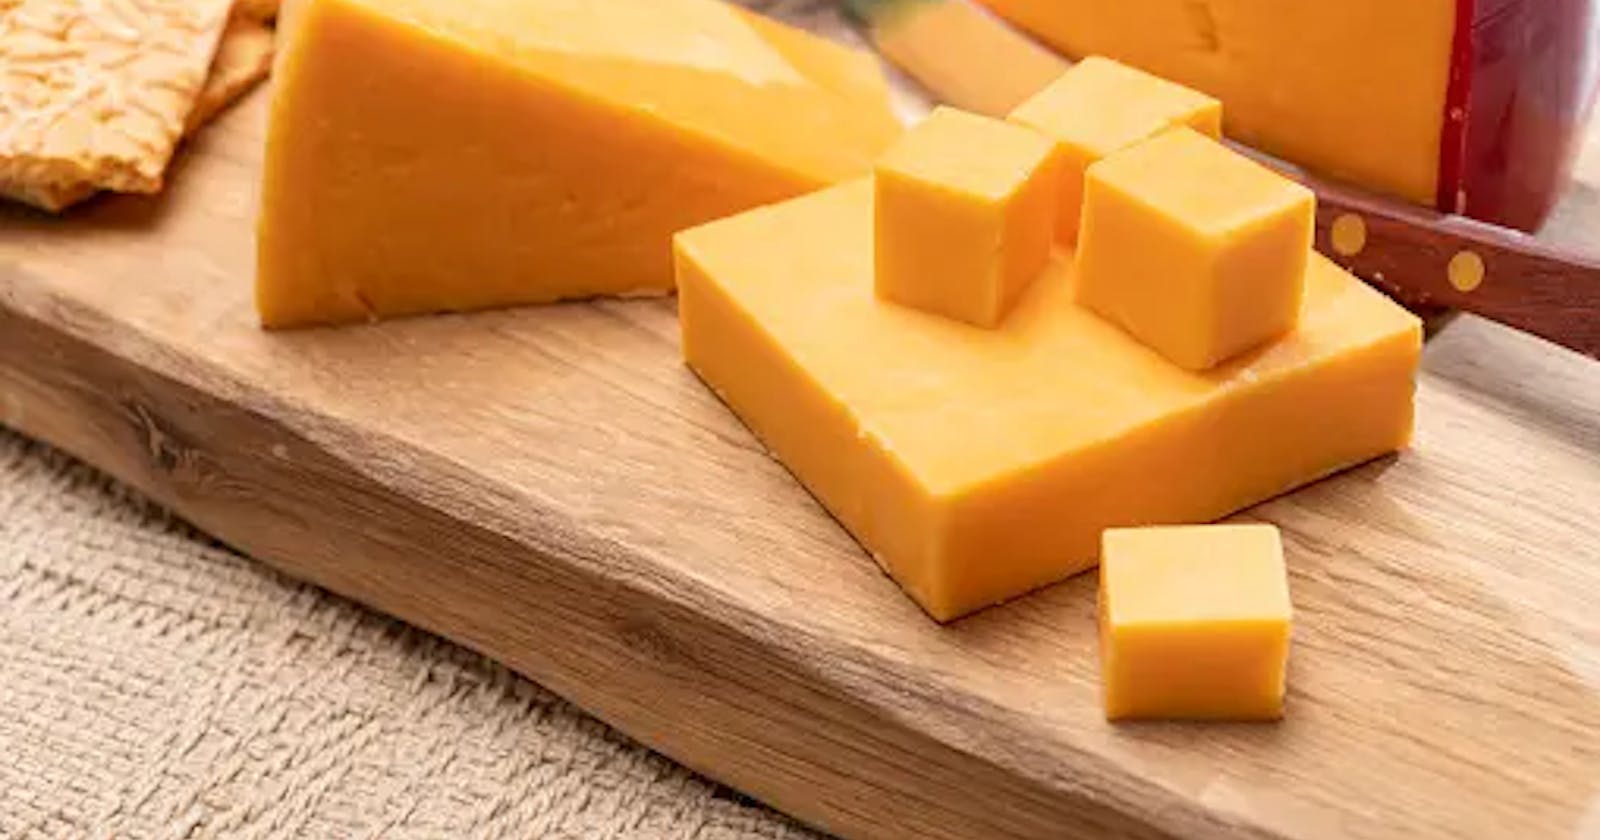 U.S. Cheese Market Future Outlook and Forecast of Market Industry Development Size